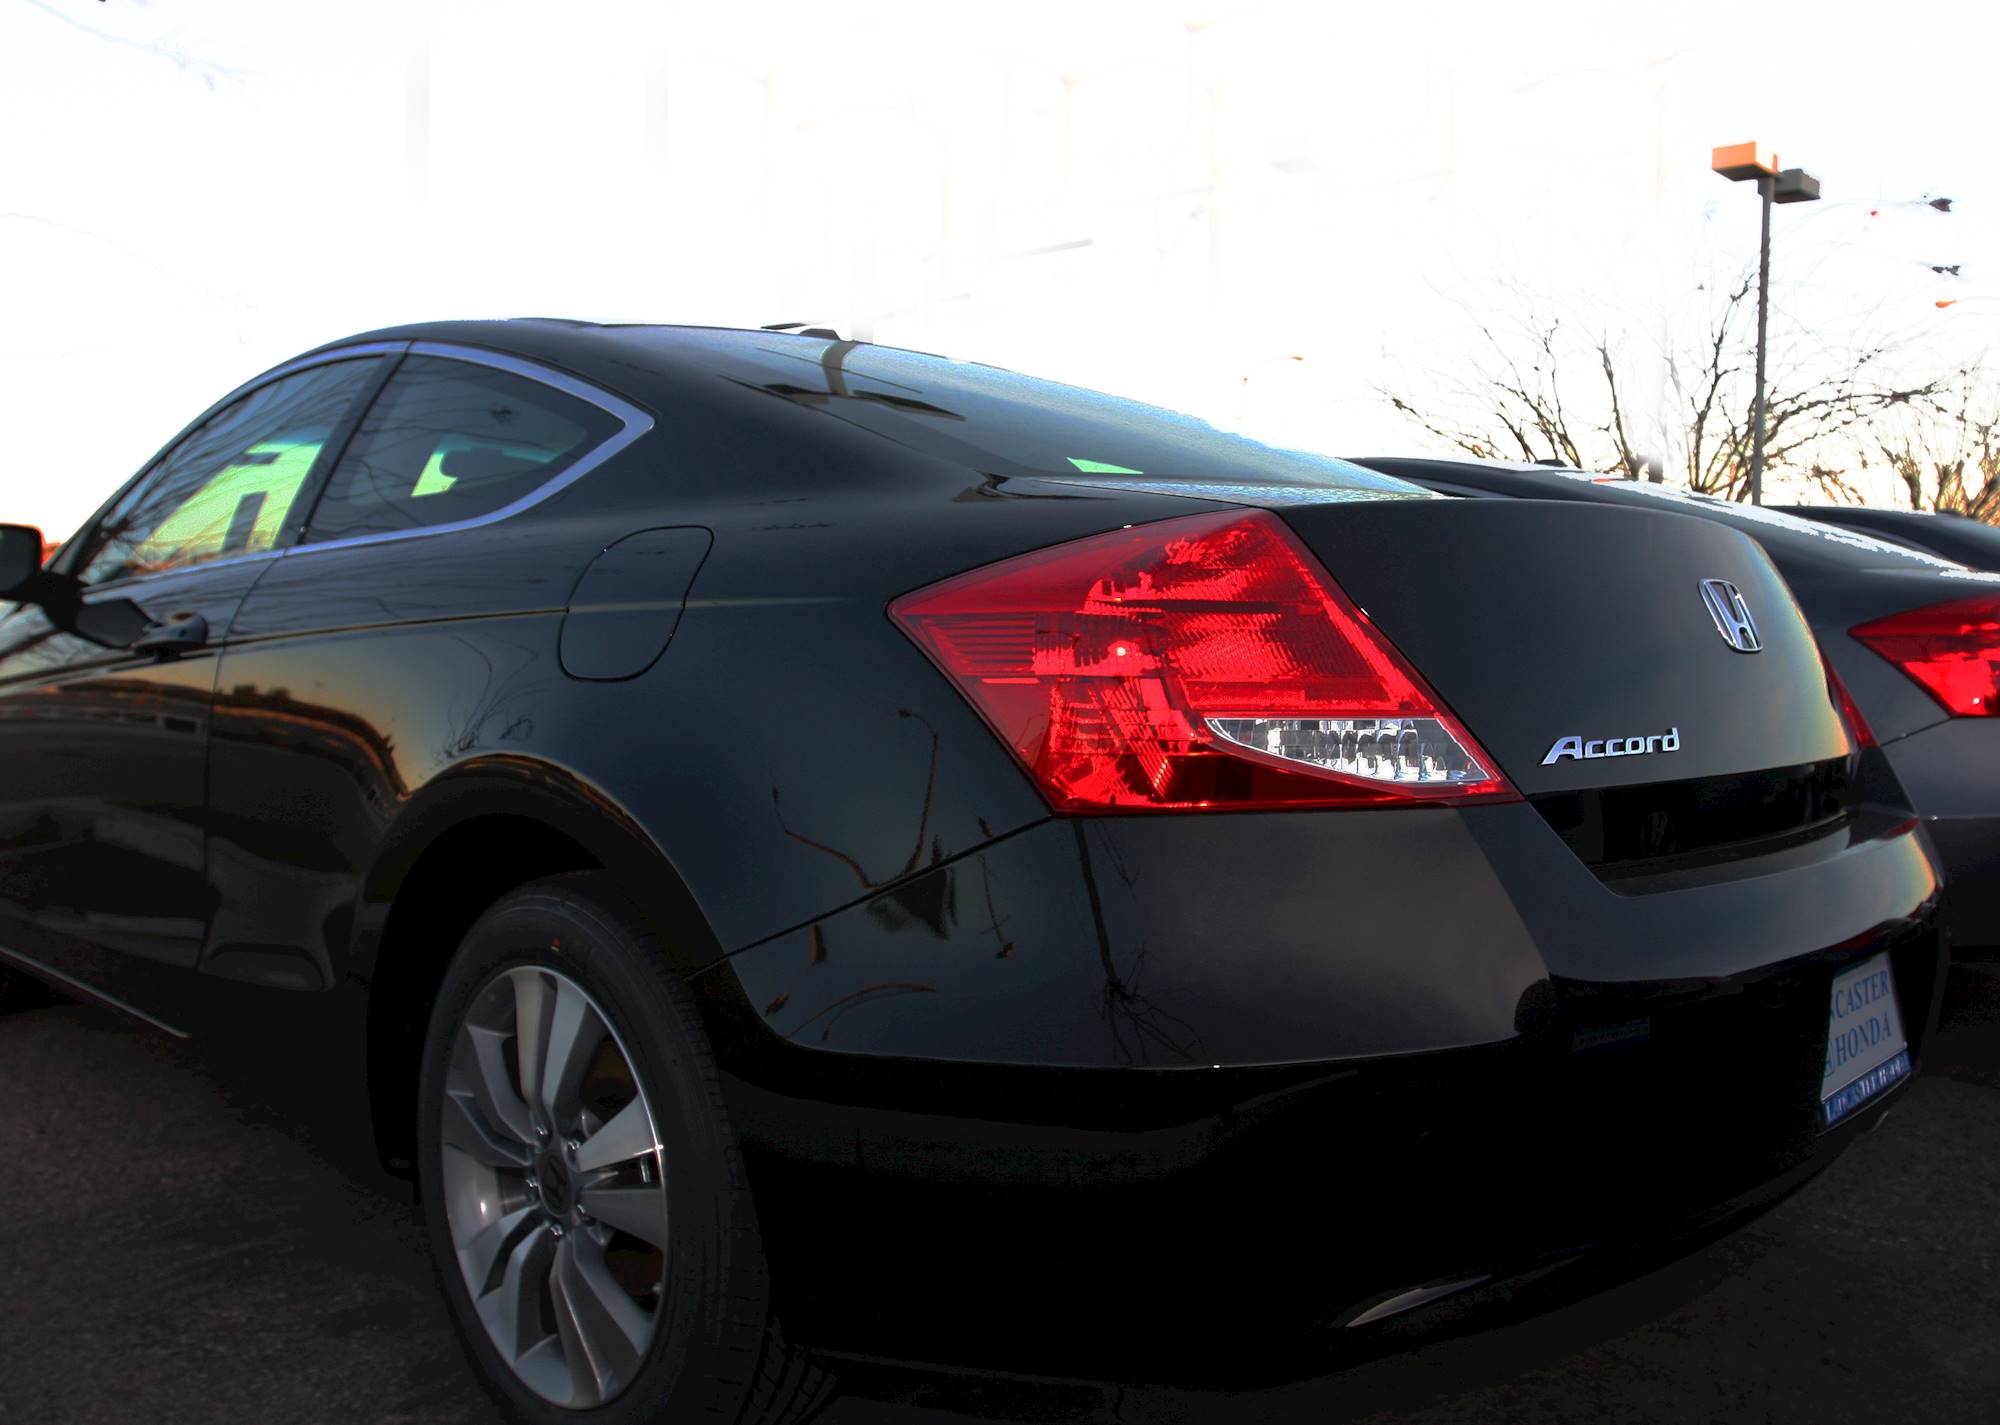 File:2011 Honda Accord Coupe Restyle In this photograph ...